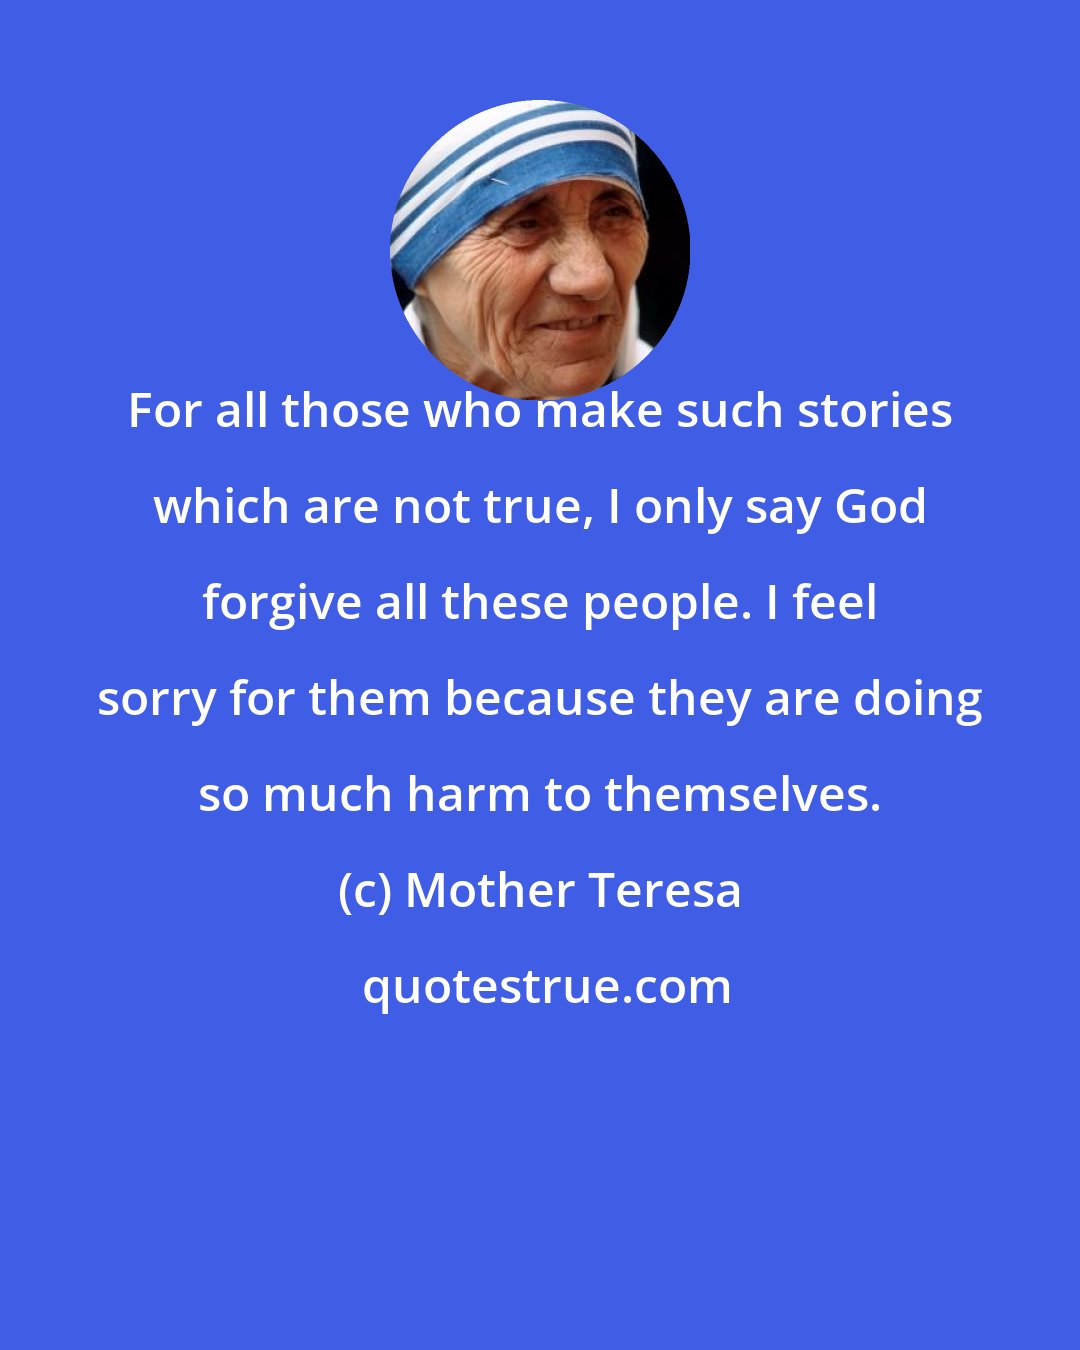 Mother Teresa: For all those who make such stories which are not true, I only say God forgive all these people. I feel sorry for them because they are doing so much harm to themselves.